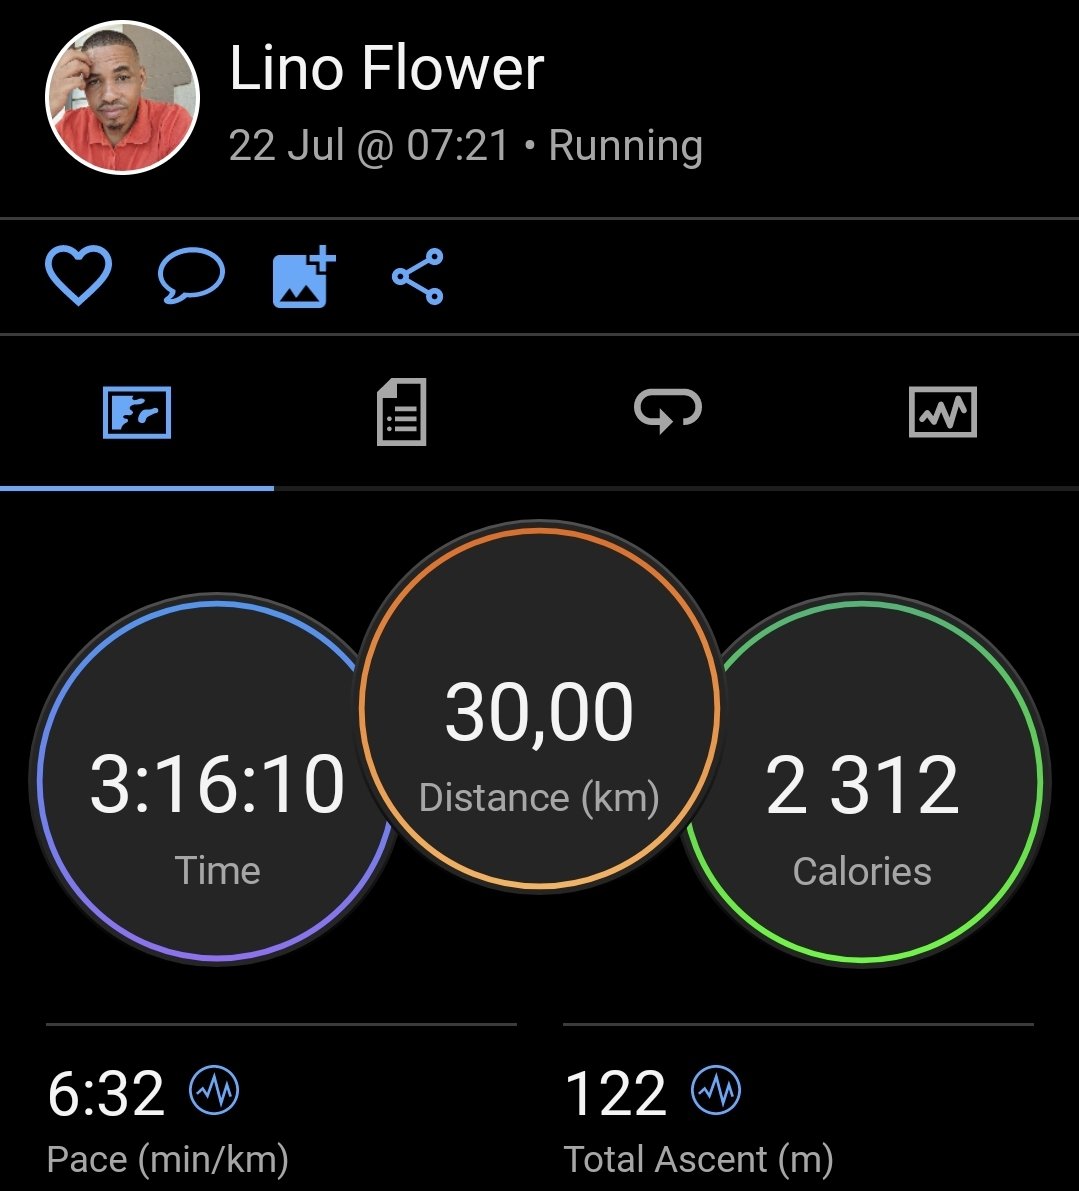 Saturday Long Run Completed
We prepare so that we don't struggle. @TheeMusa you see champ,it's done.
#Runningwithtumisole 
#RunningSuccessfully 
#fetchyourbody2023 
#runningeithflower